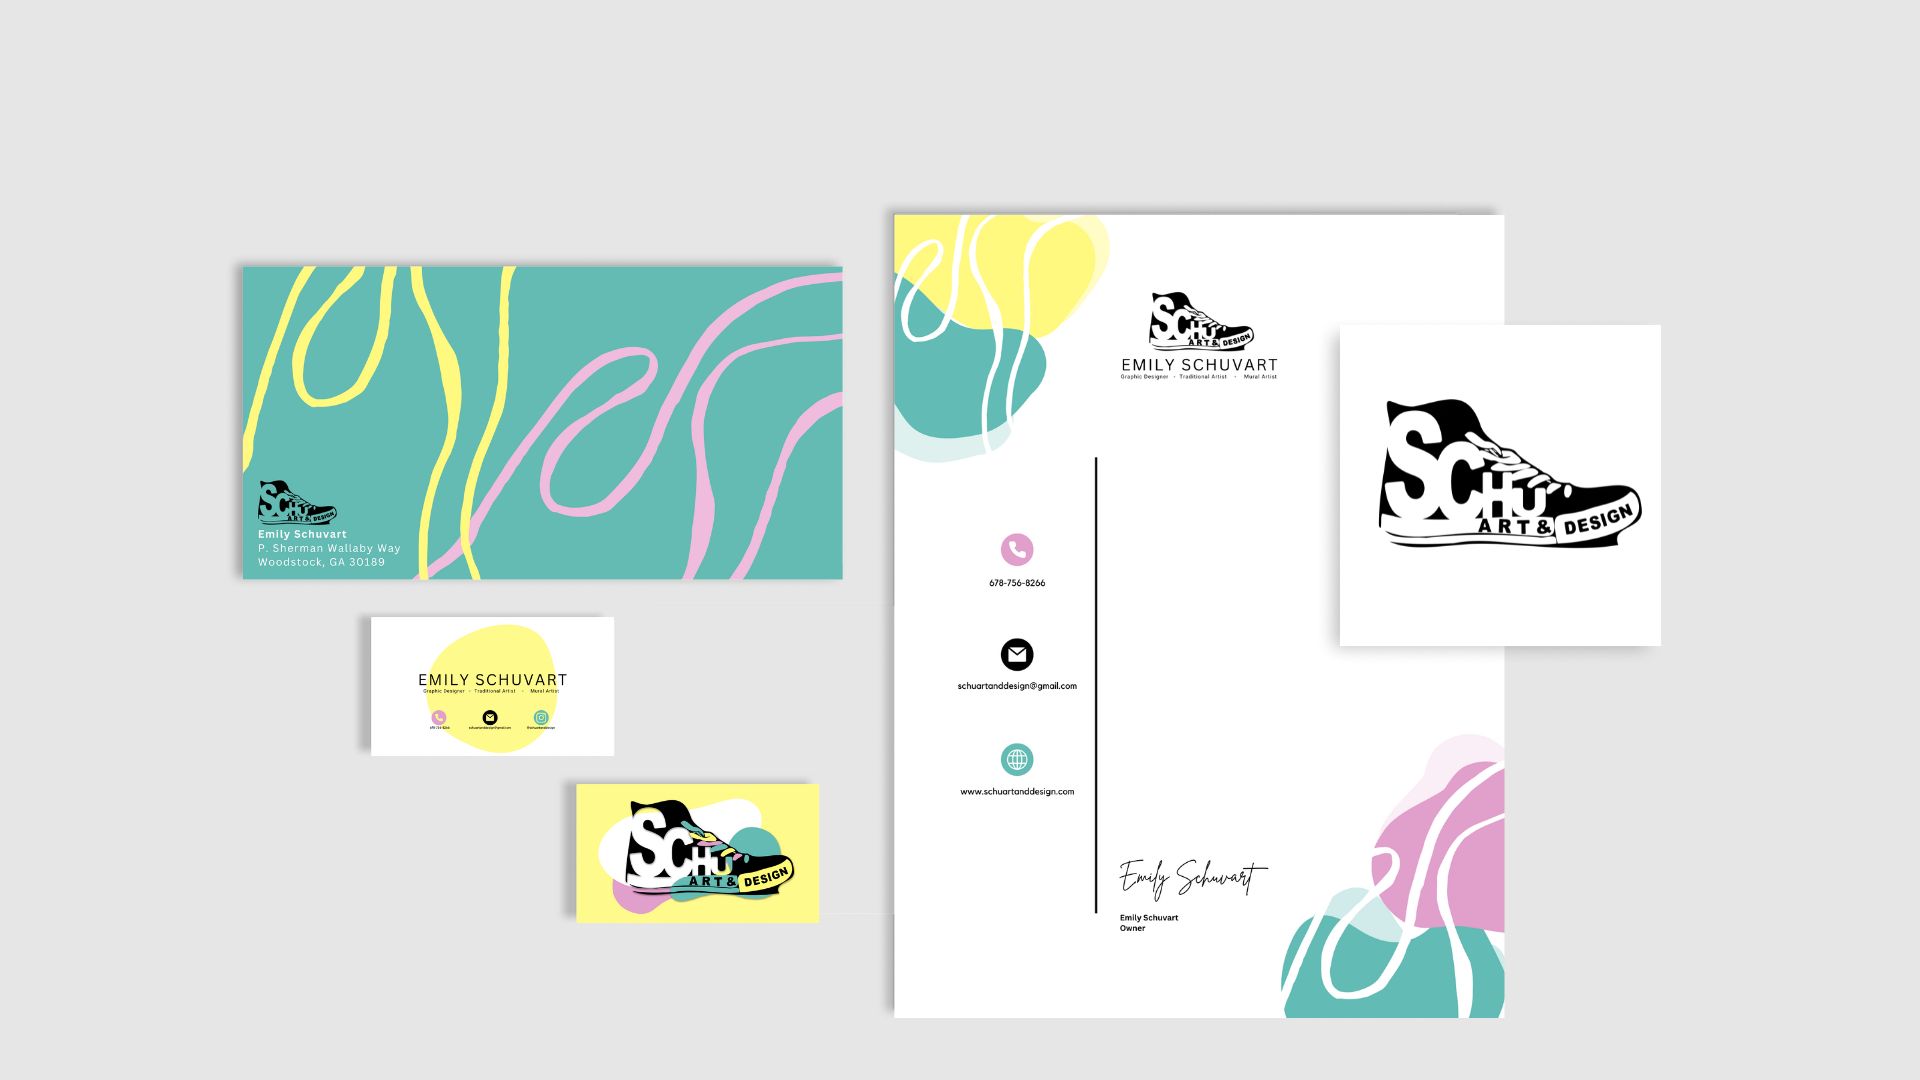 "Schu Brand Collateral" Branding Package / "Schu Brand Collateral" Branding Package, 1080x1920 px PNG, 2023. This is my letter-head, logo, business card, and envelope. I want it to be fun, playful and representative of my work.
